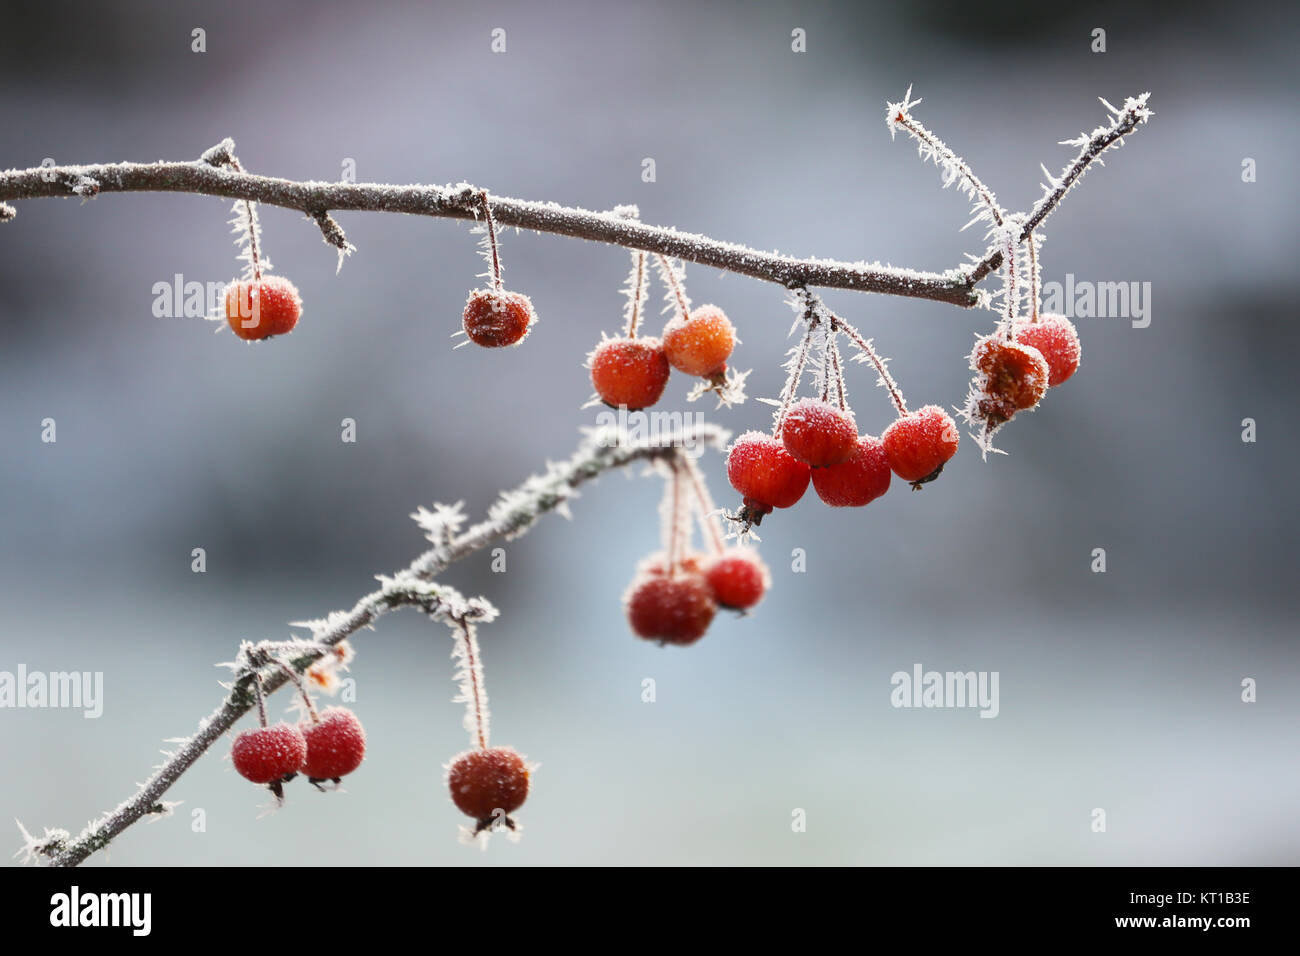 ornamental apples with ice crystals in winter Stock Photo